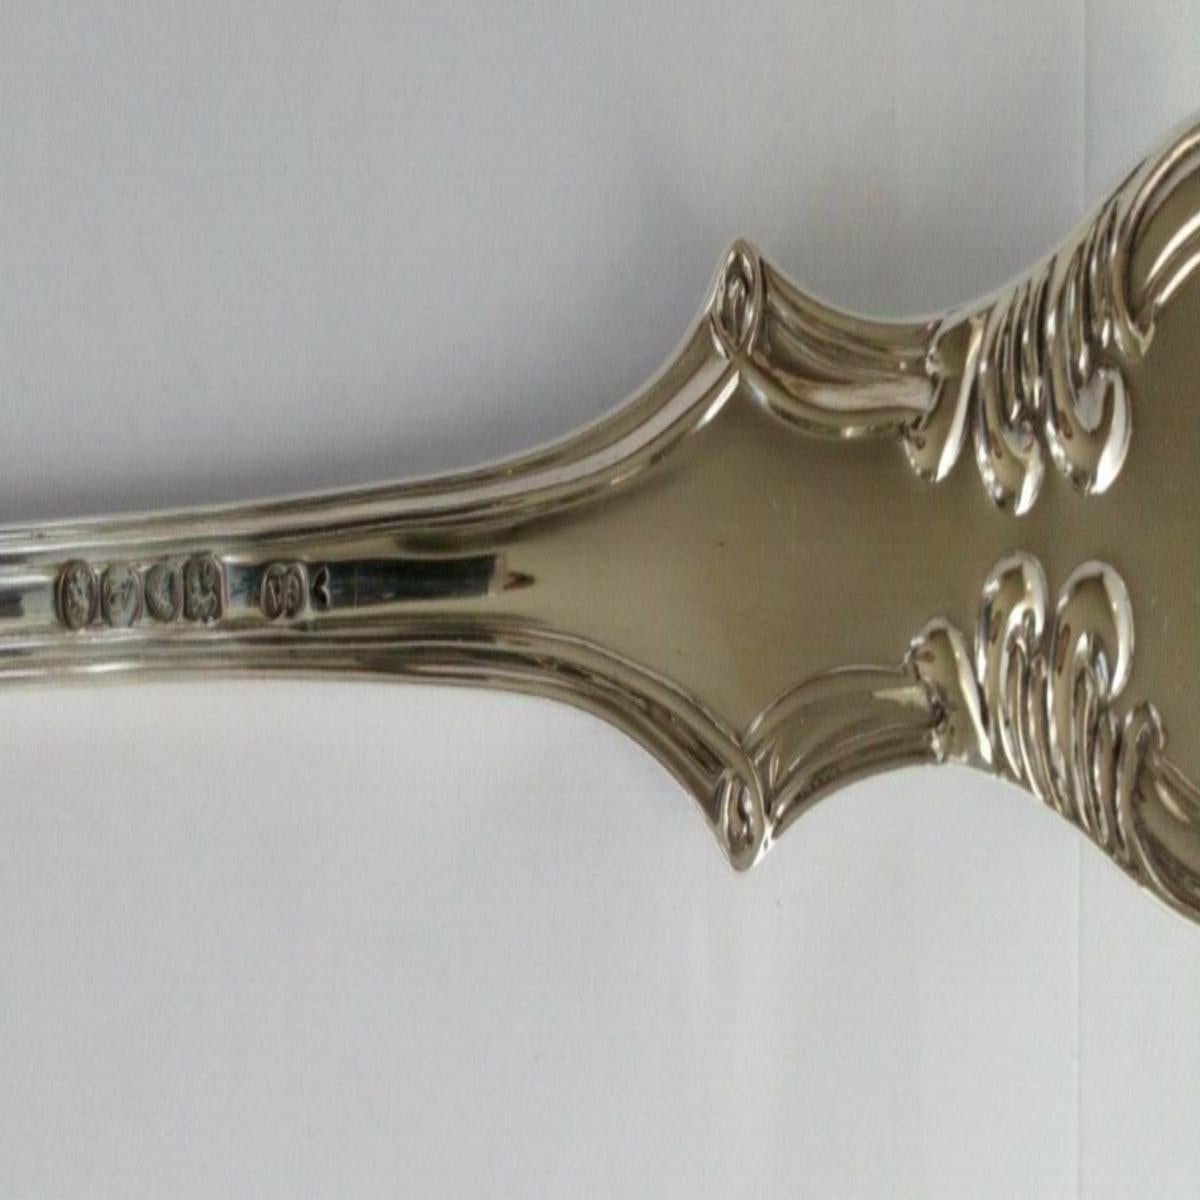 Victorian Sterling Silver Ladle by Chawner & Co, 1859 For Sale 6